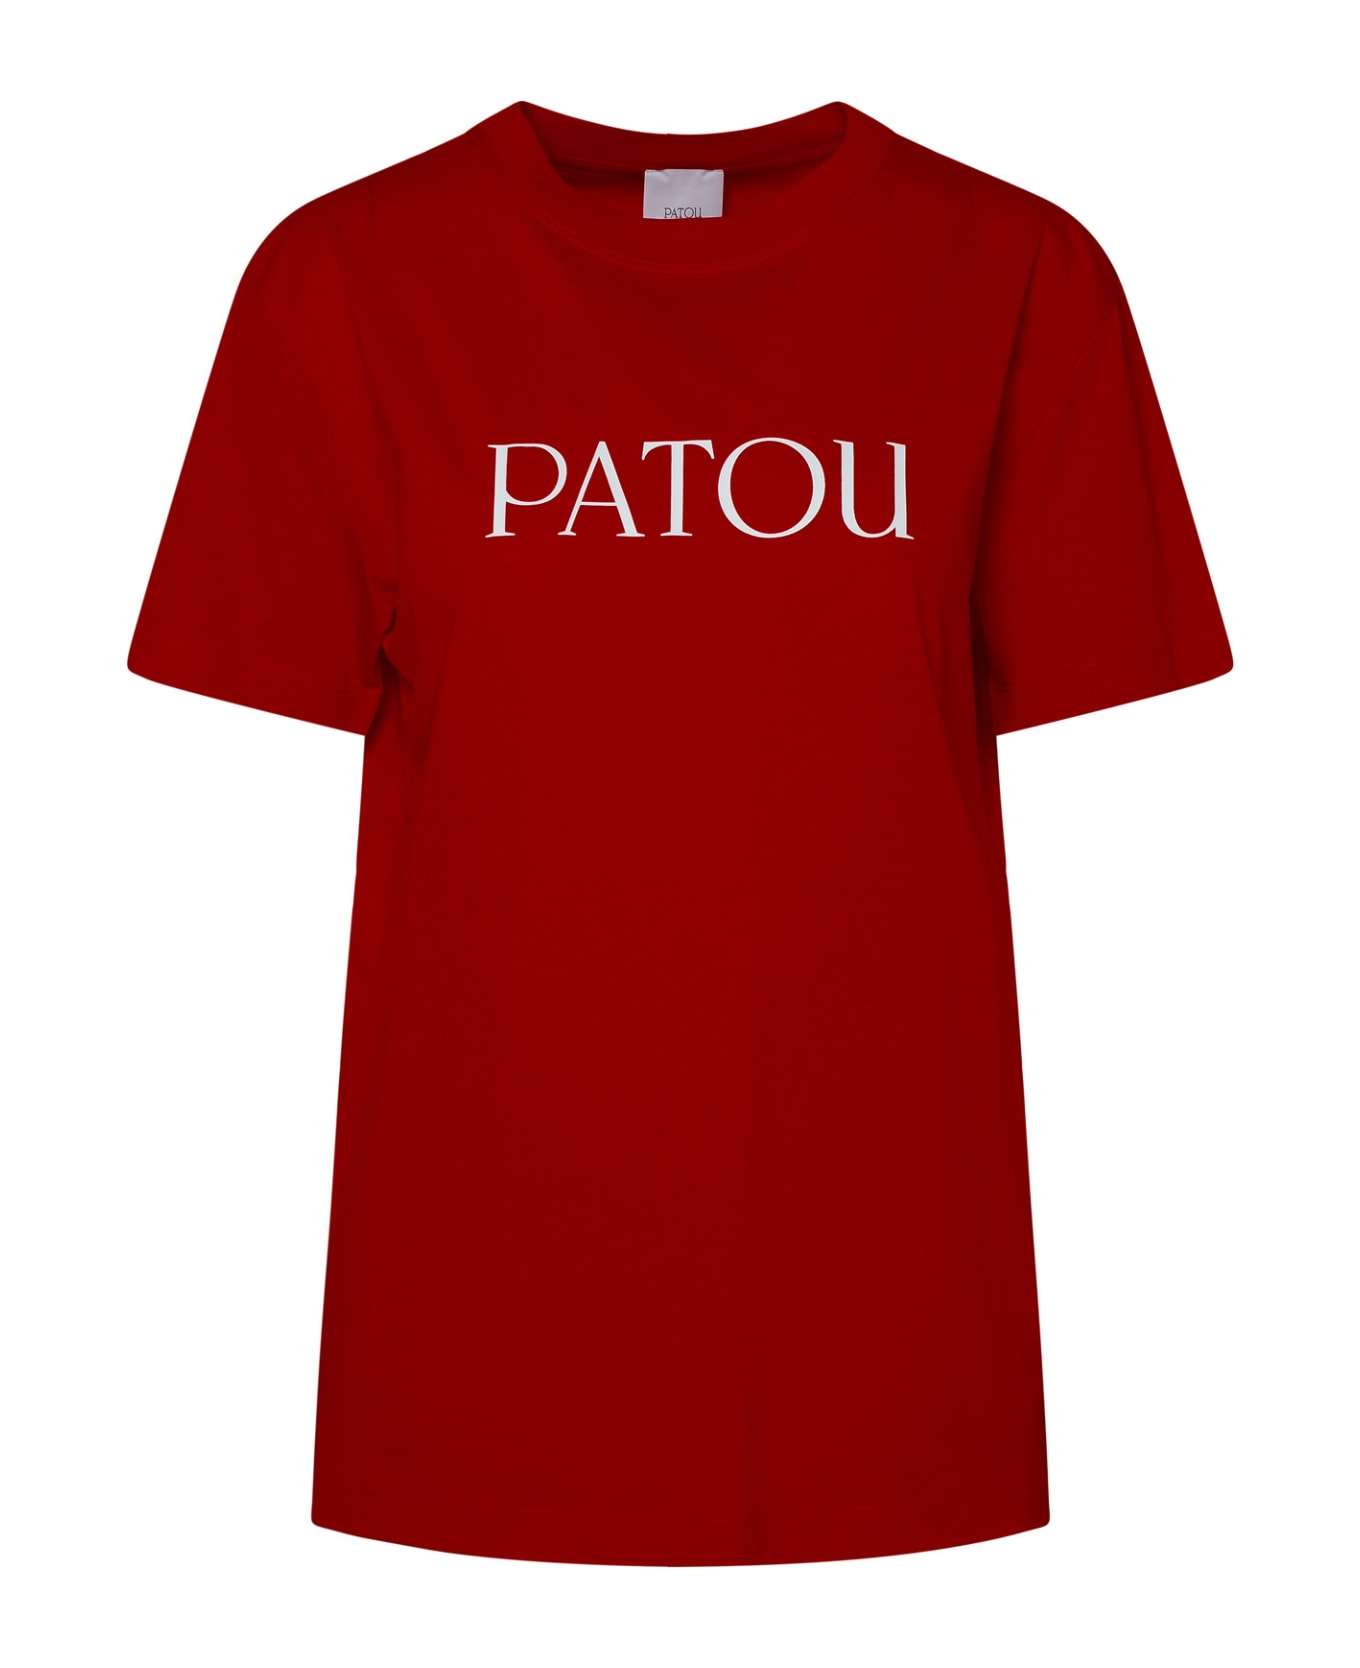 Patou Red Cotton T-shirt - Red